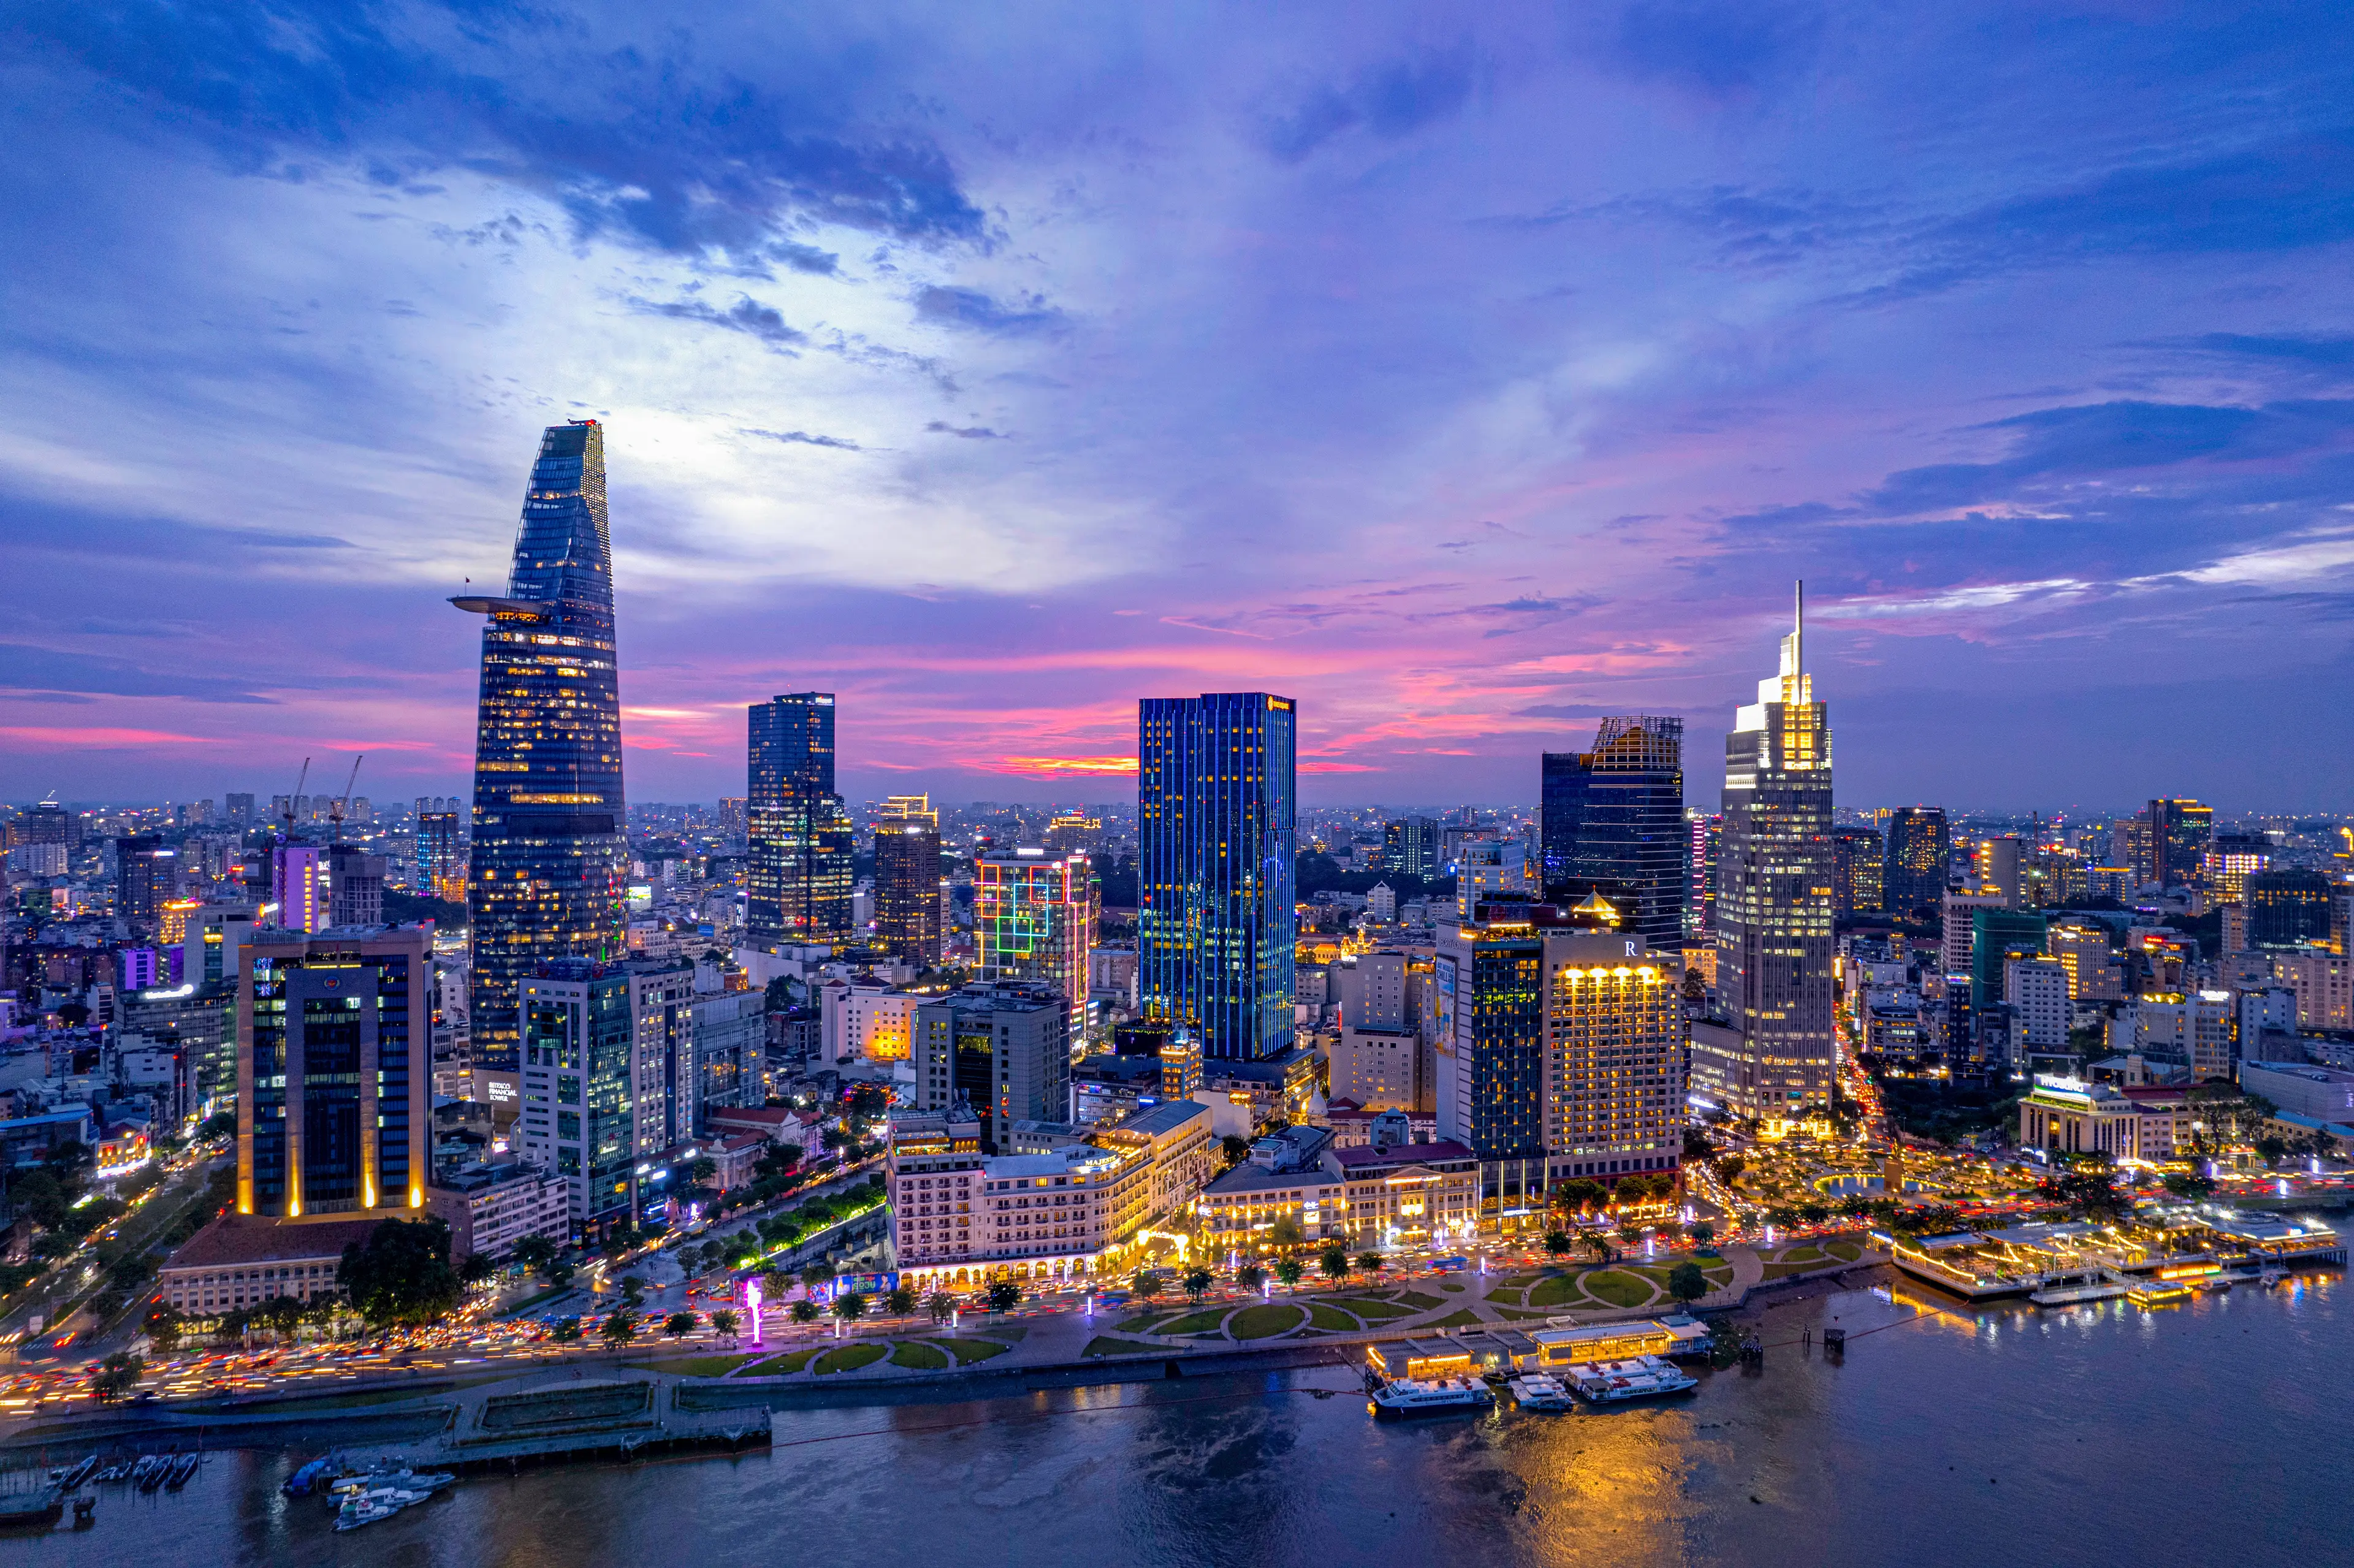 3-Day Adventure & Culinary Journey with Friends in Ho Chi Minh City